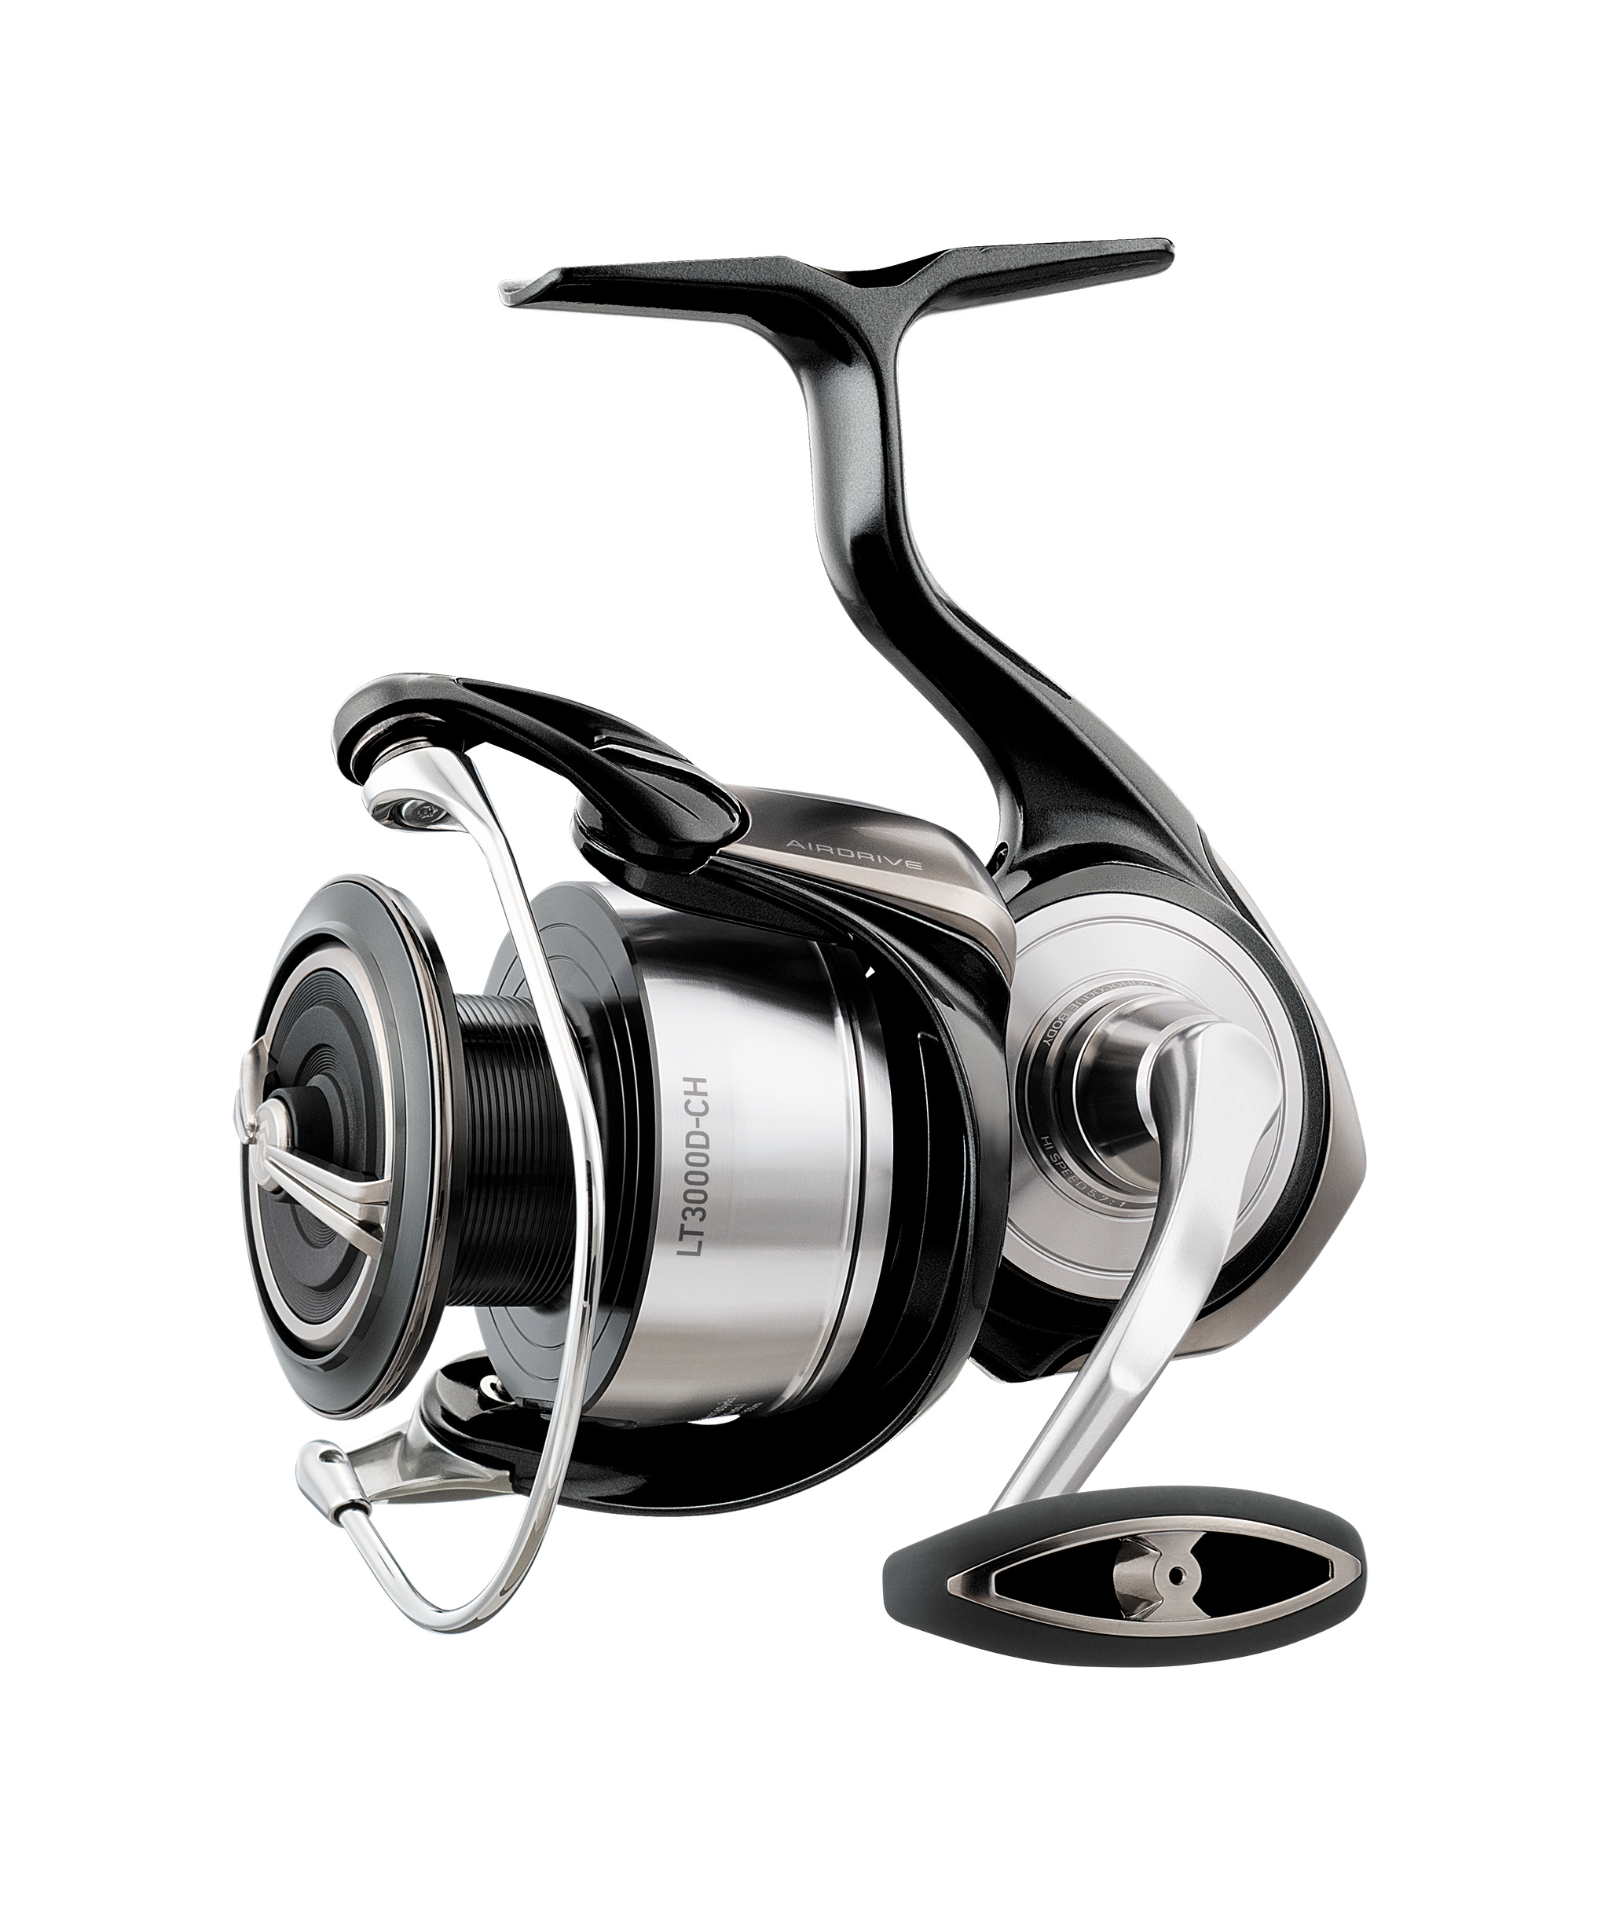 WOEN LT2500 All Metal Accurate Spinning Reels With Shallow Line